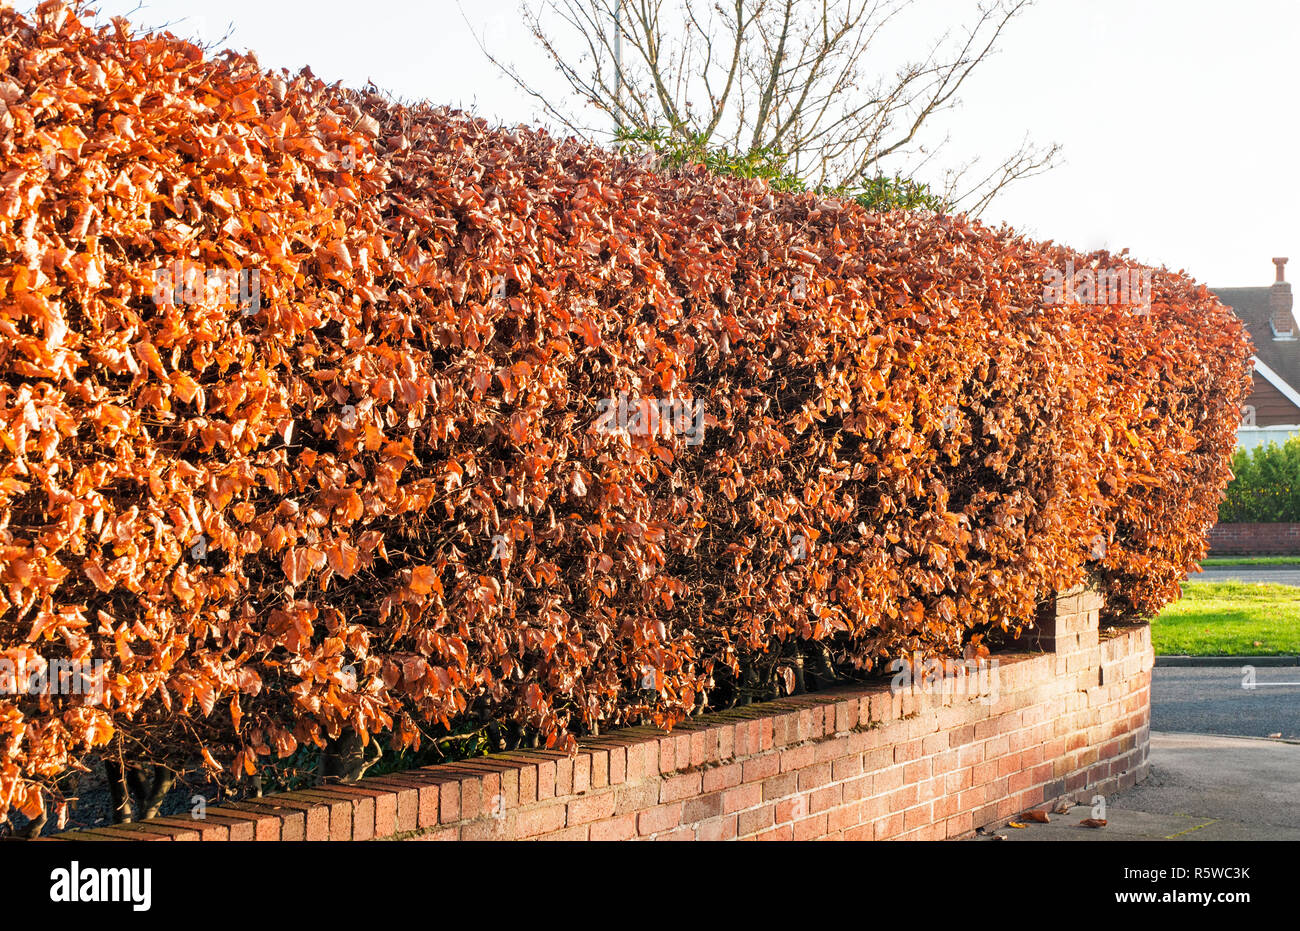 25 Copper beech Hedging Fagus Slyvatica 40//60 2 foot